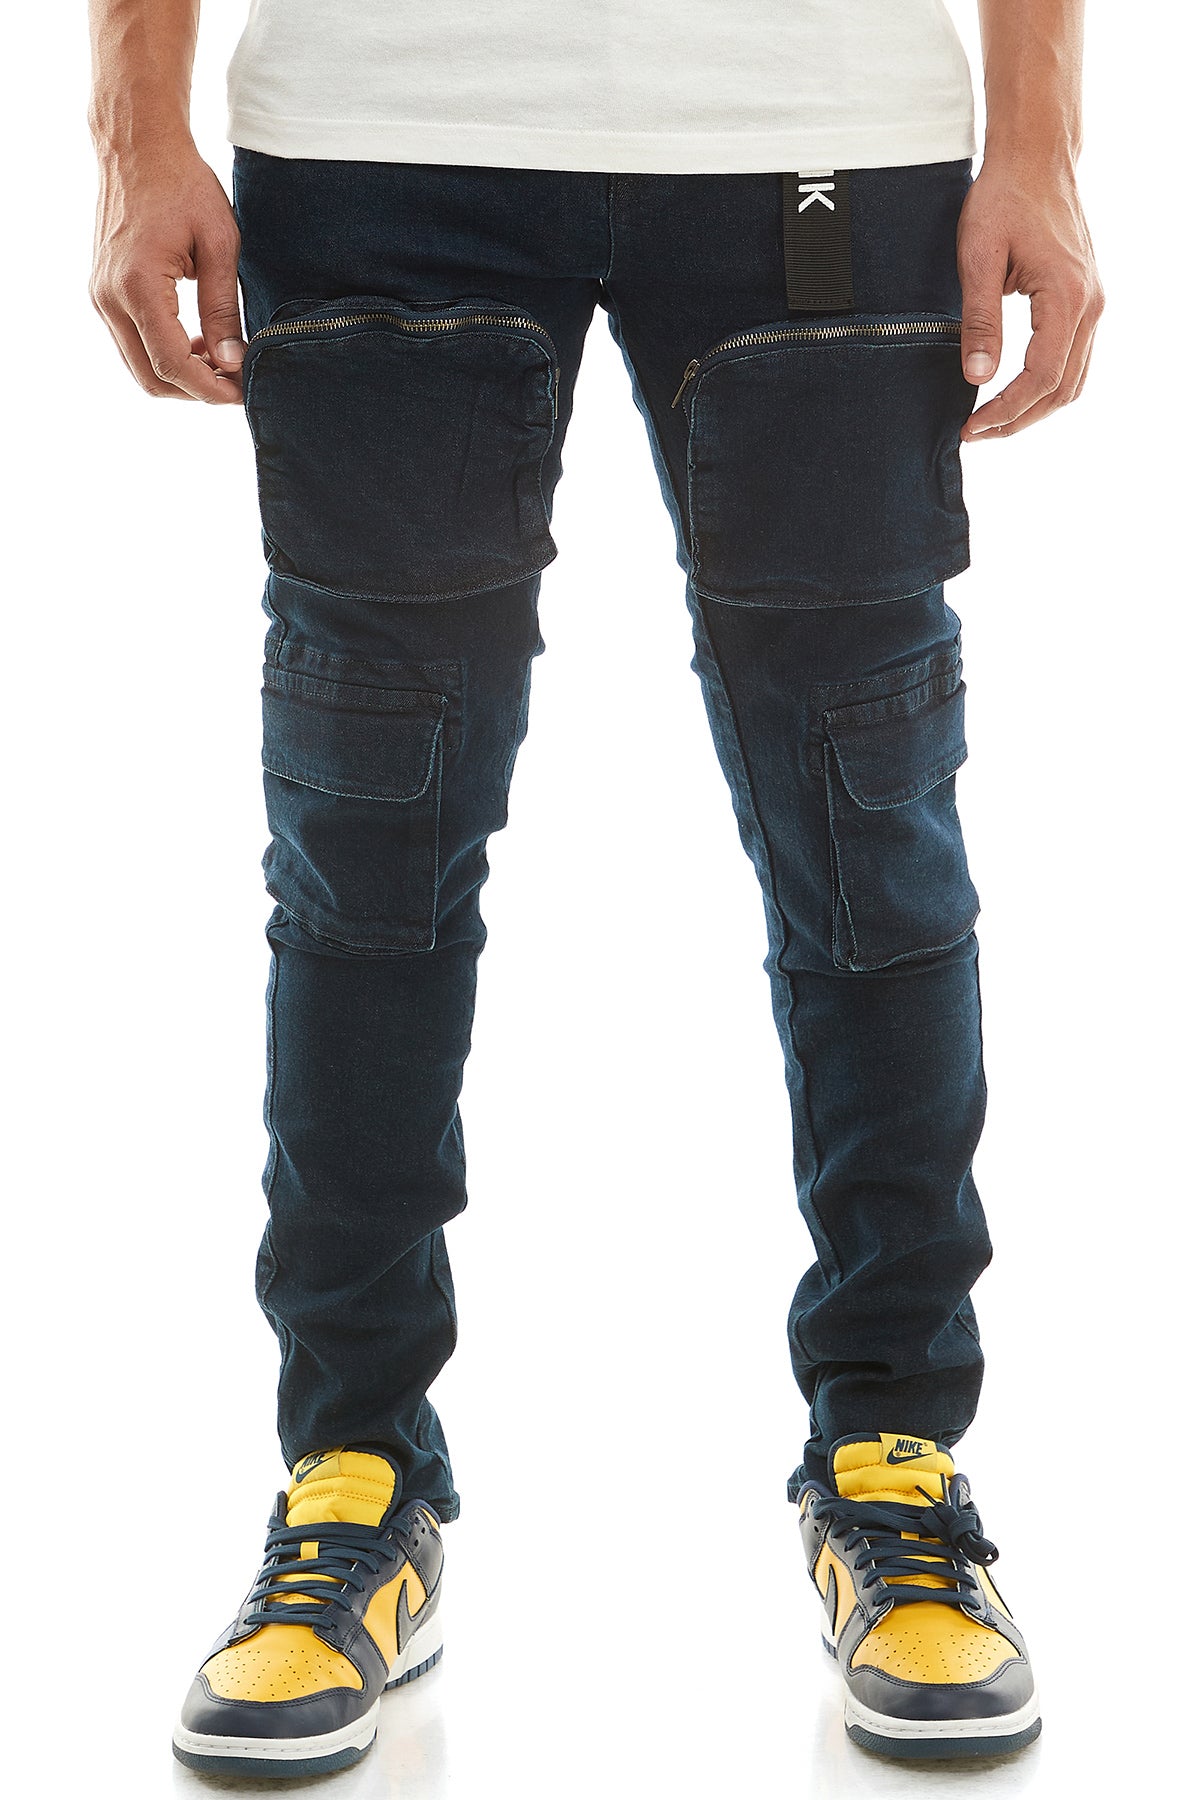 2X2 JEANS